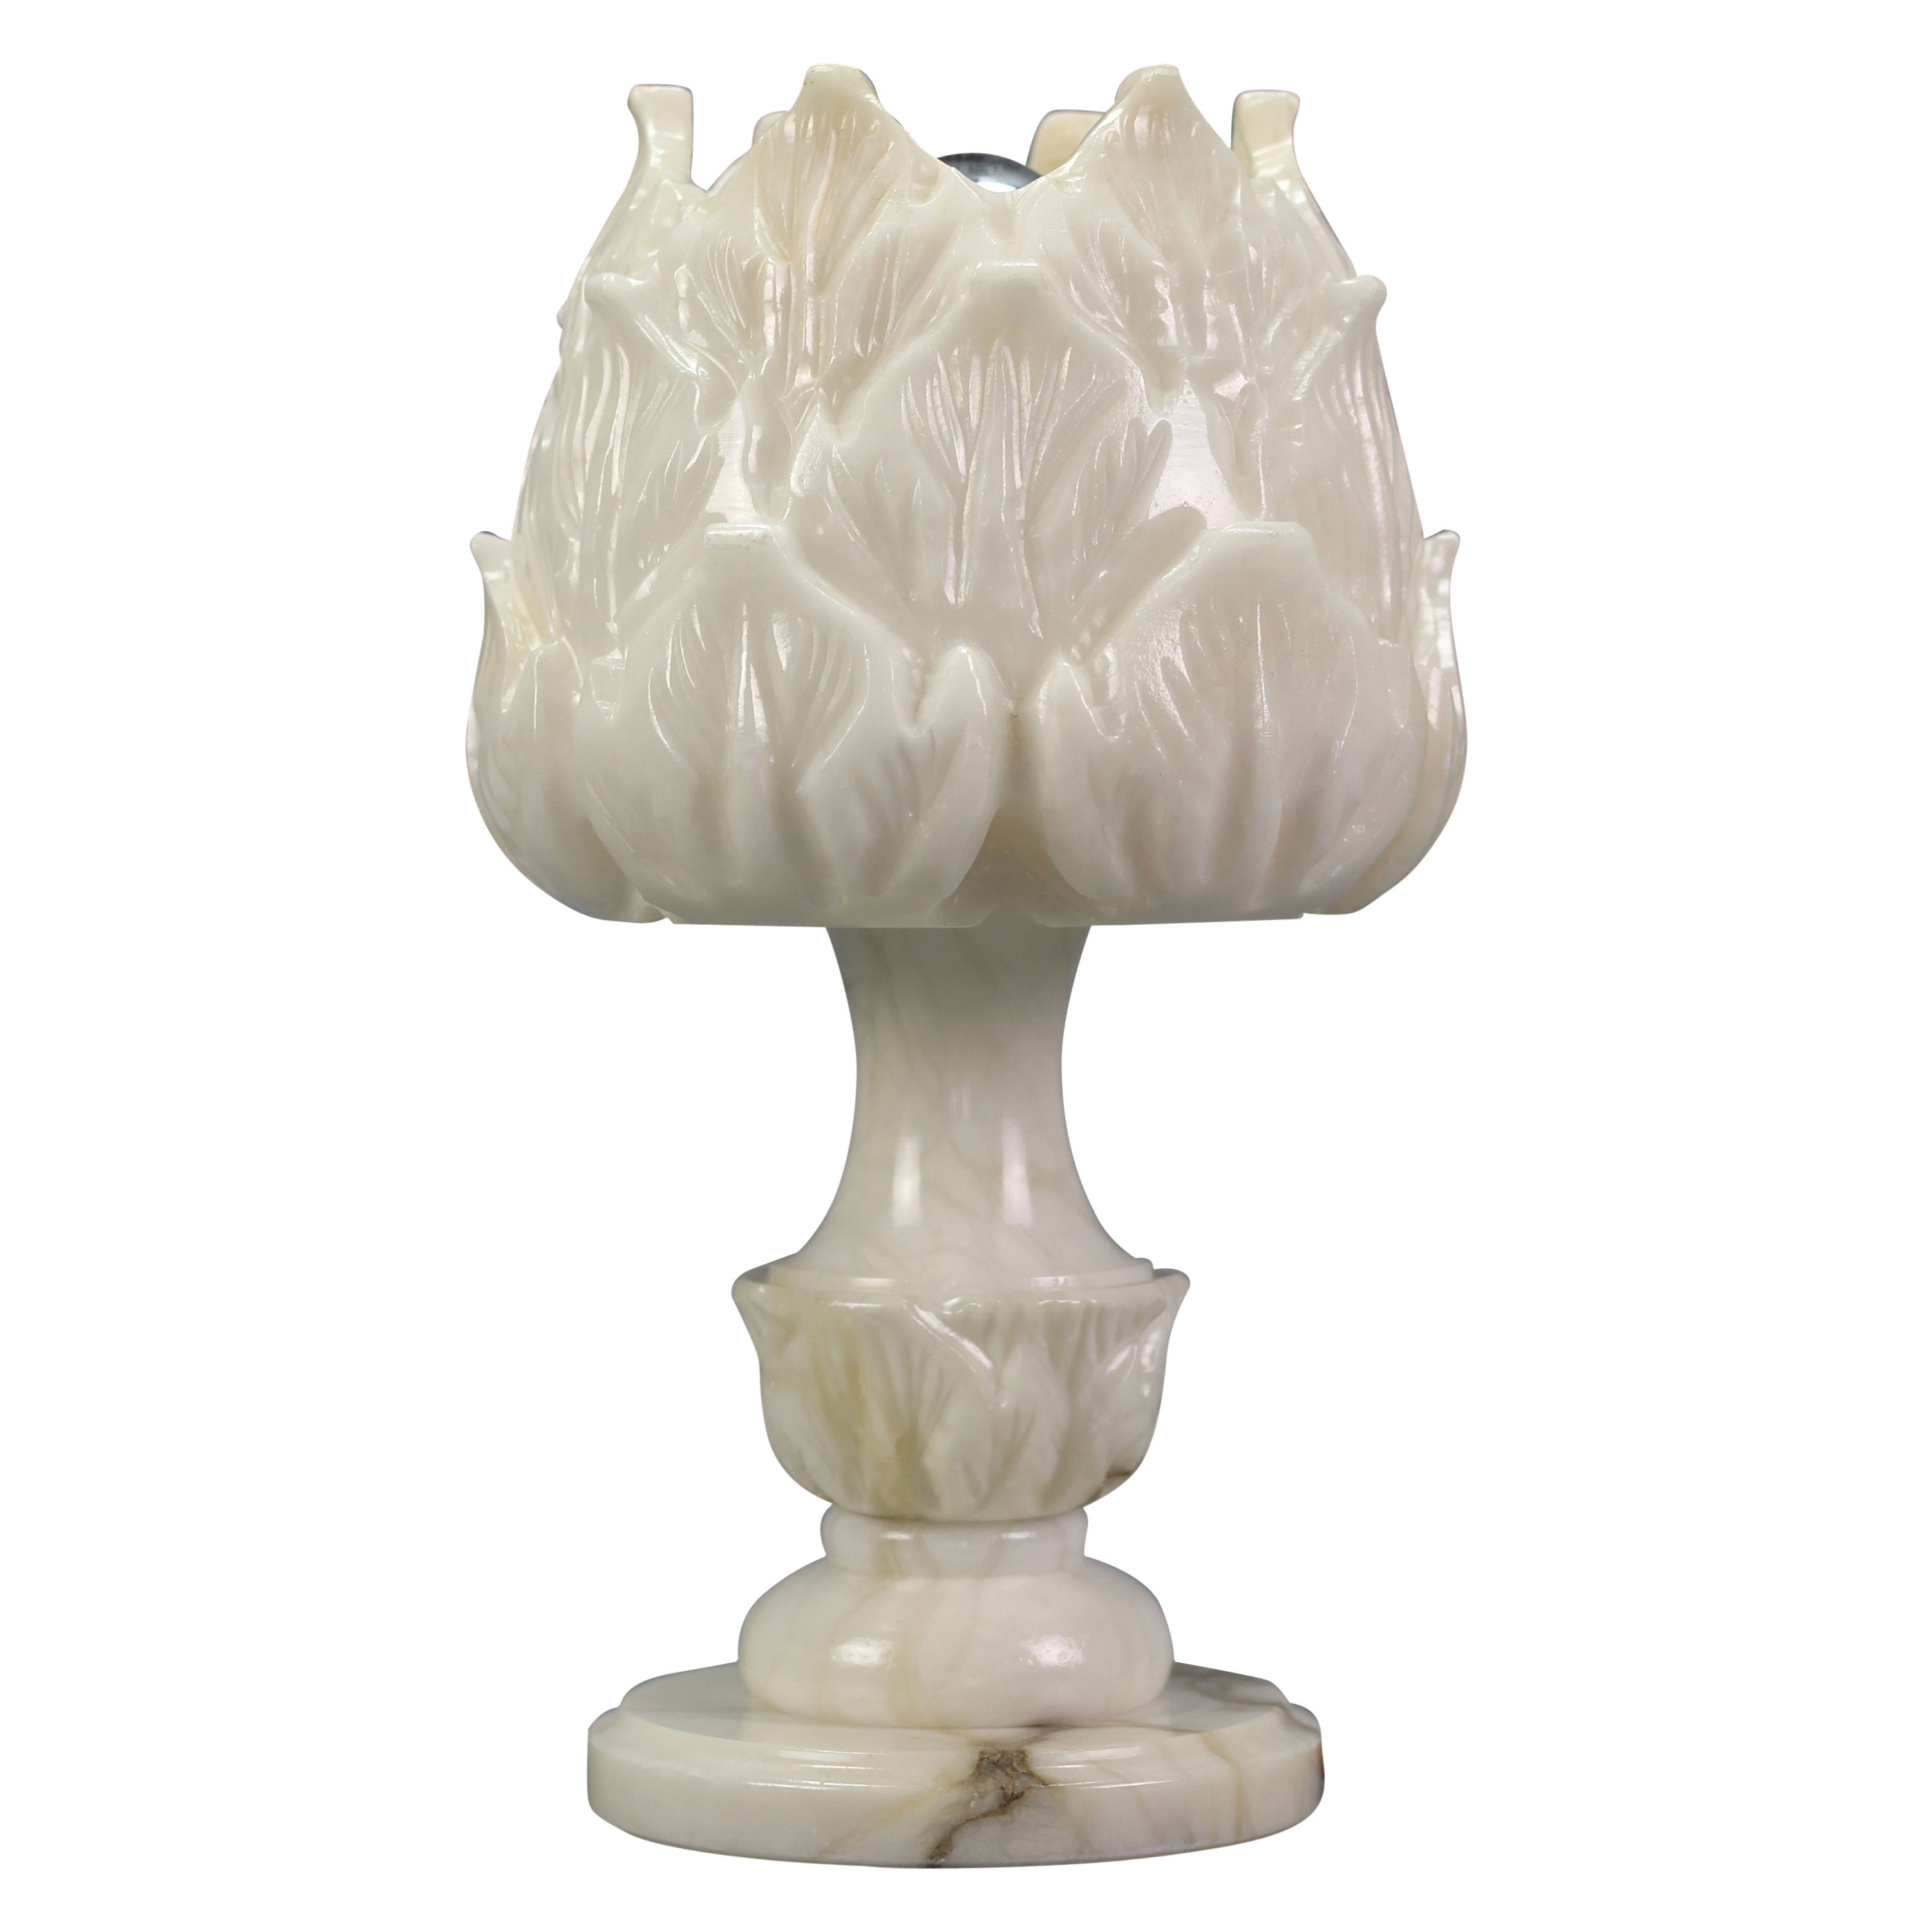 Italian Mid-Century Flower-Shaped White Alabaster Table Lamp or Mood Lamp, 1950s For Sale